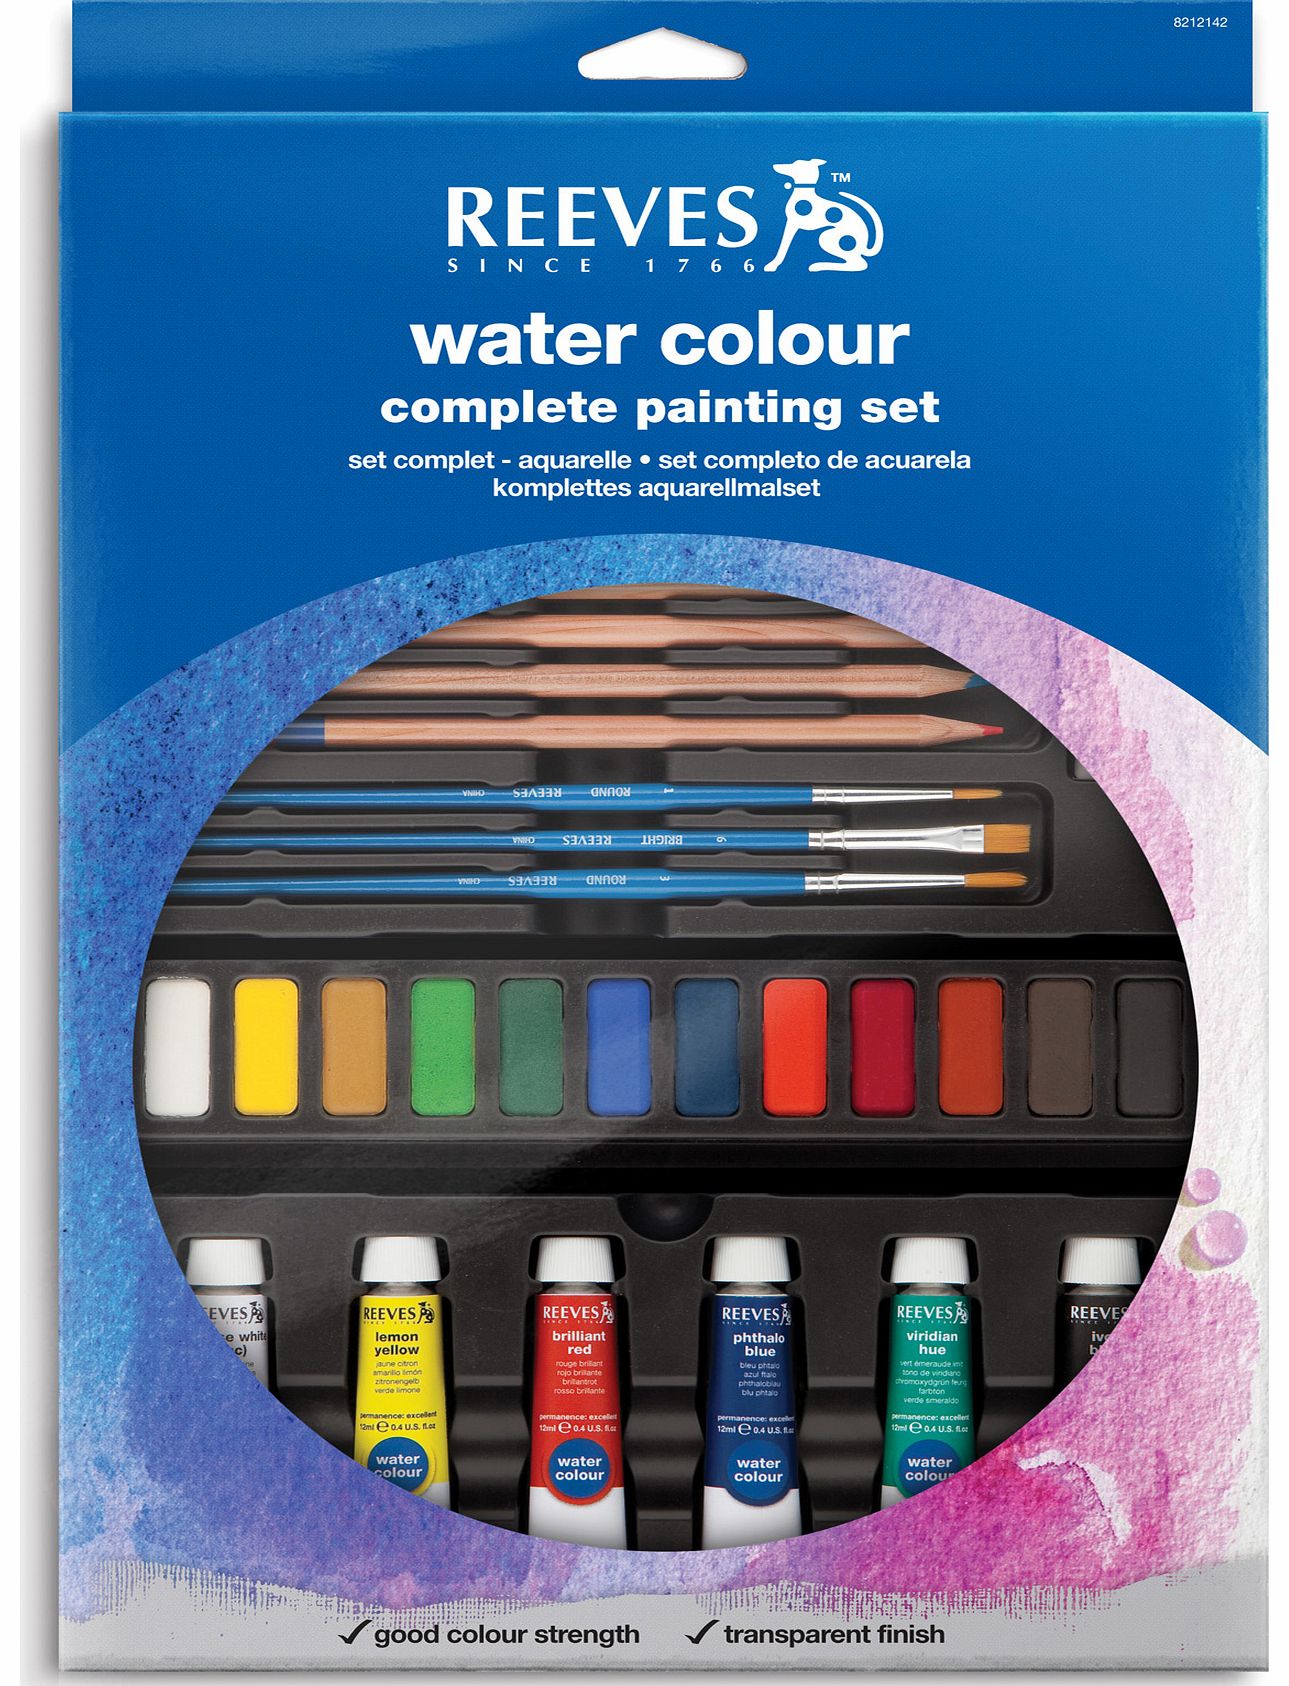 Reeves Complete Watercolour Painting Set